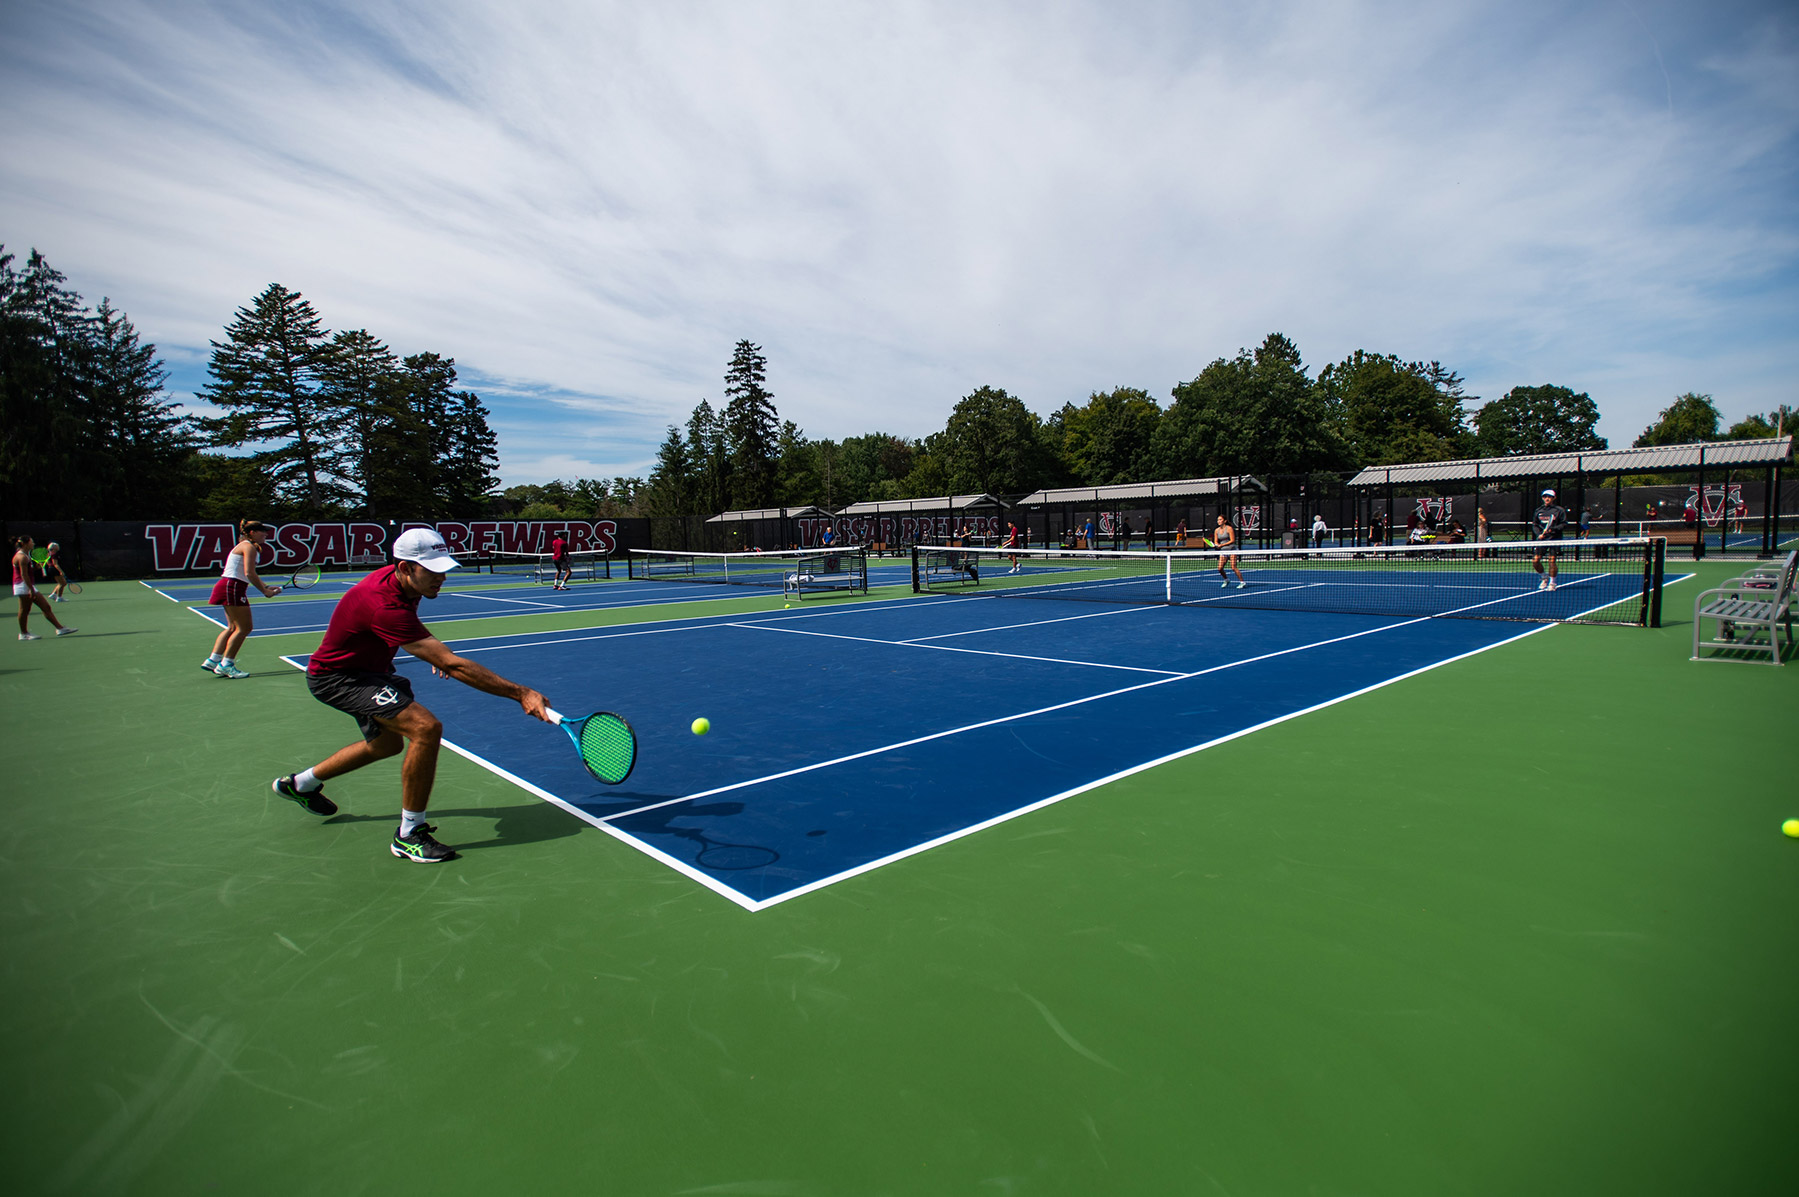 Photo of a tennis court from a corner with a person hitting a tennis ball in the foreground to a person across the net.